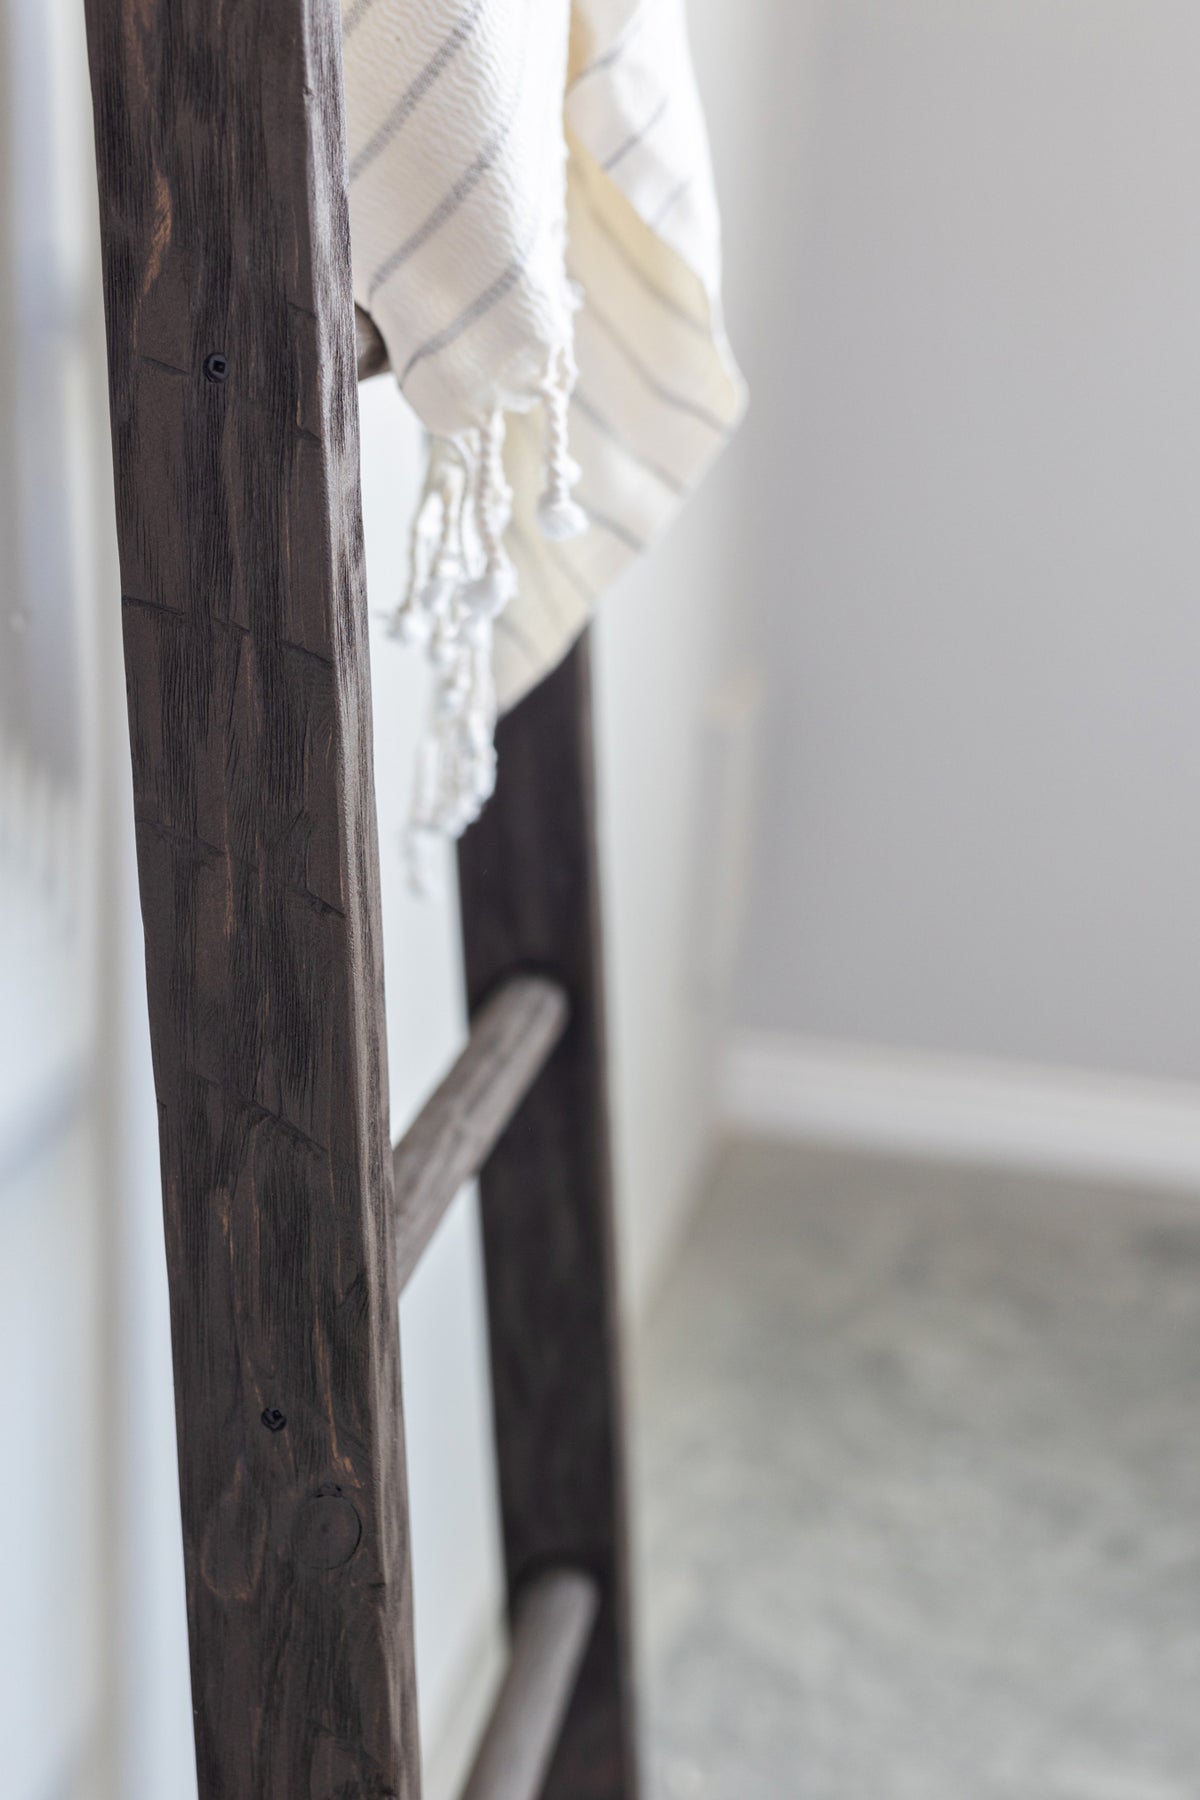 Farmhouse Blanket Ladder with Blanket the middle